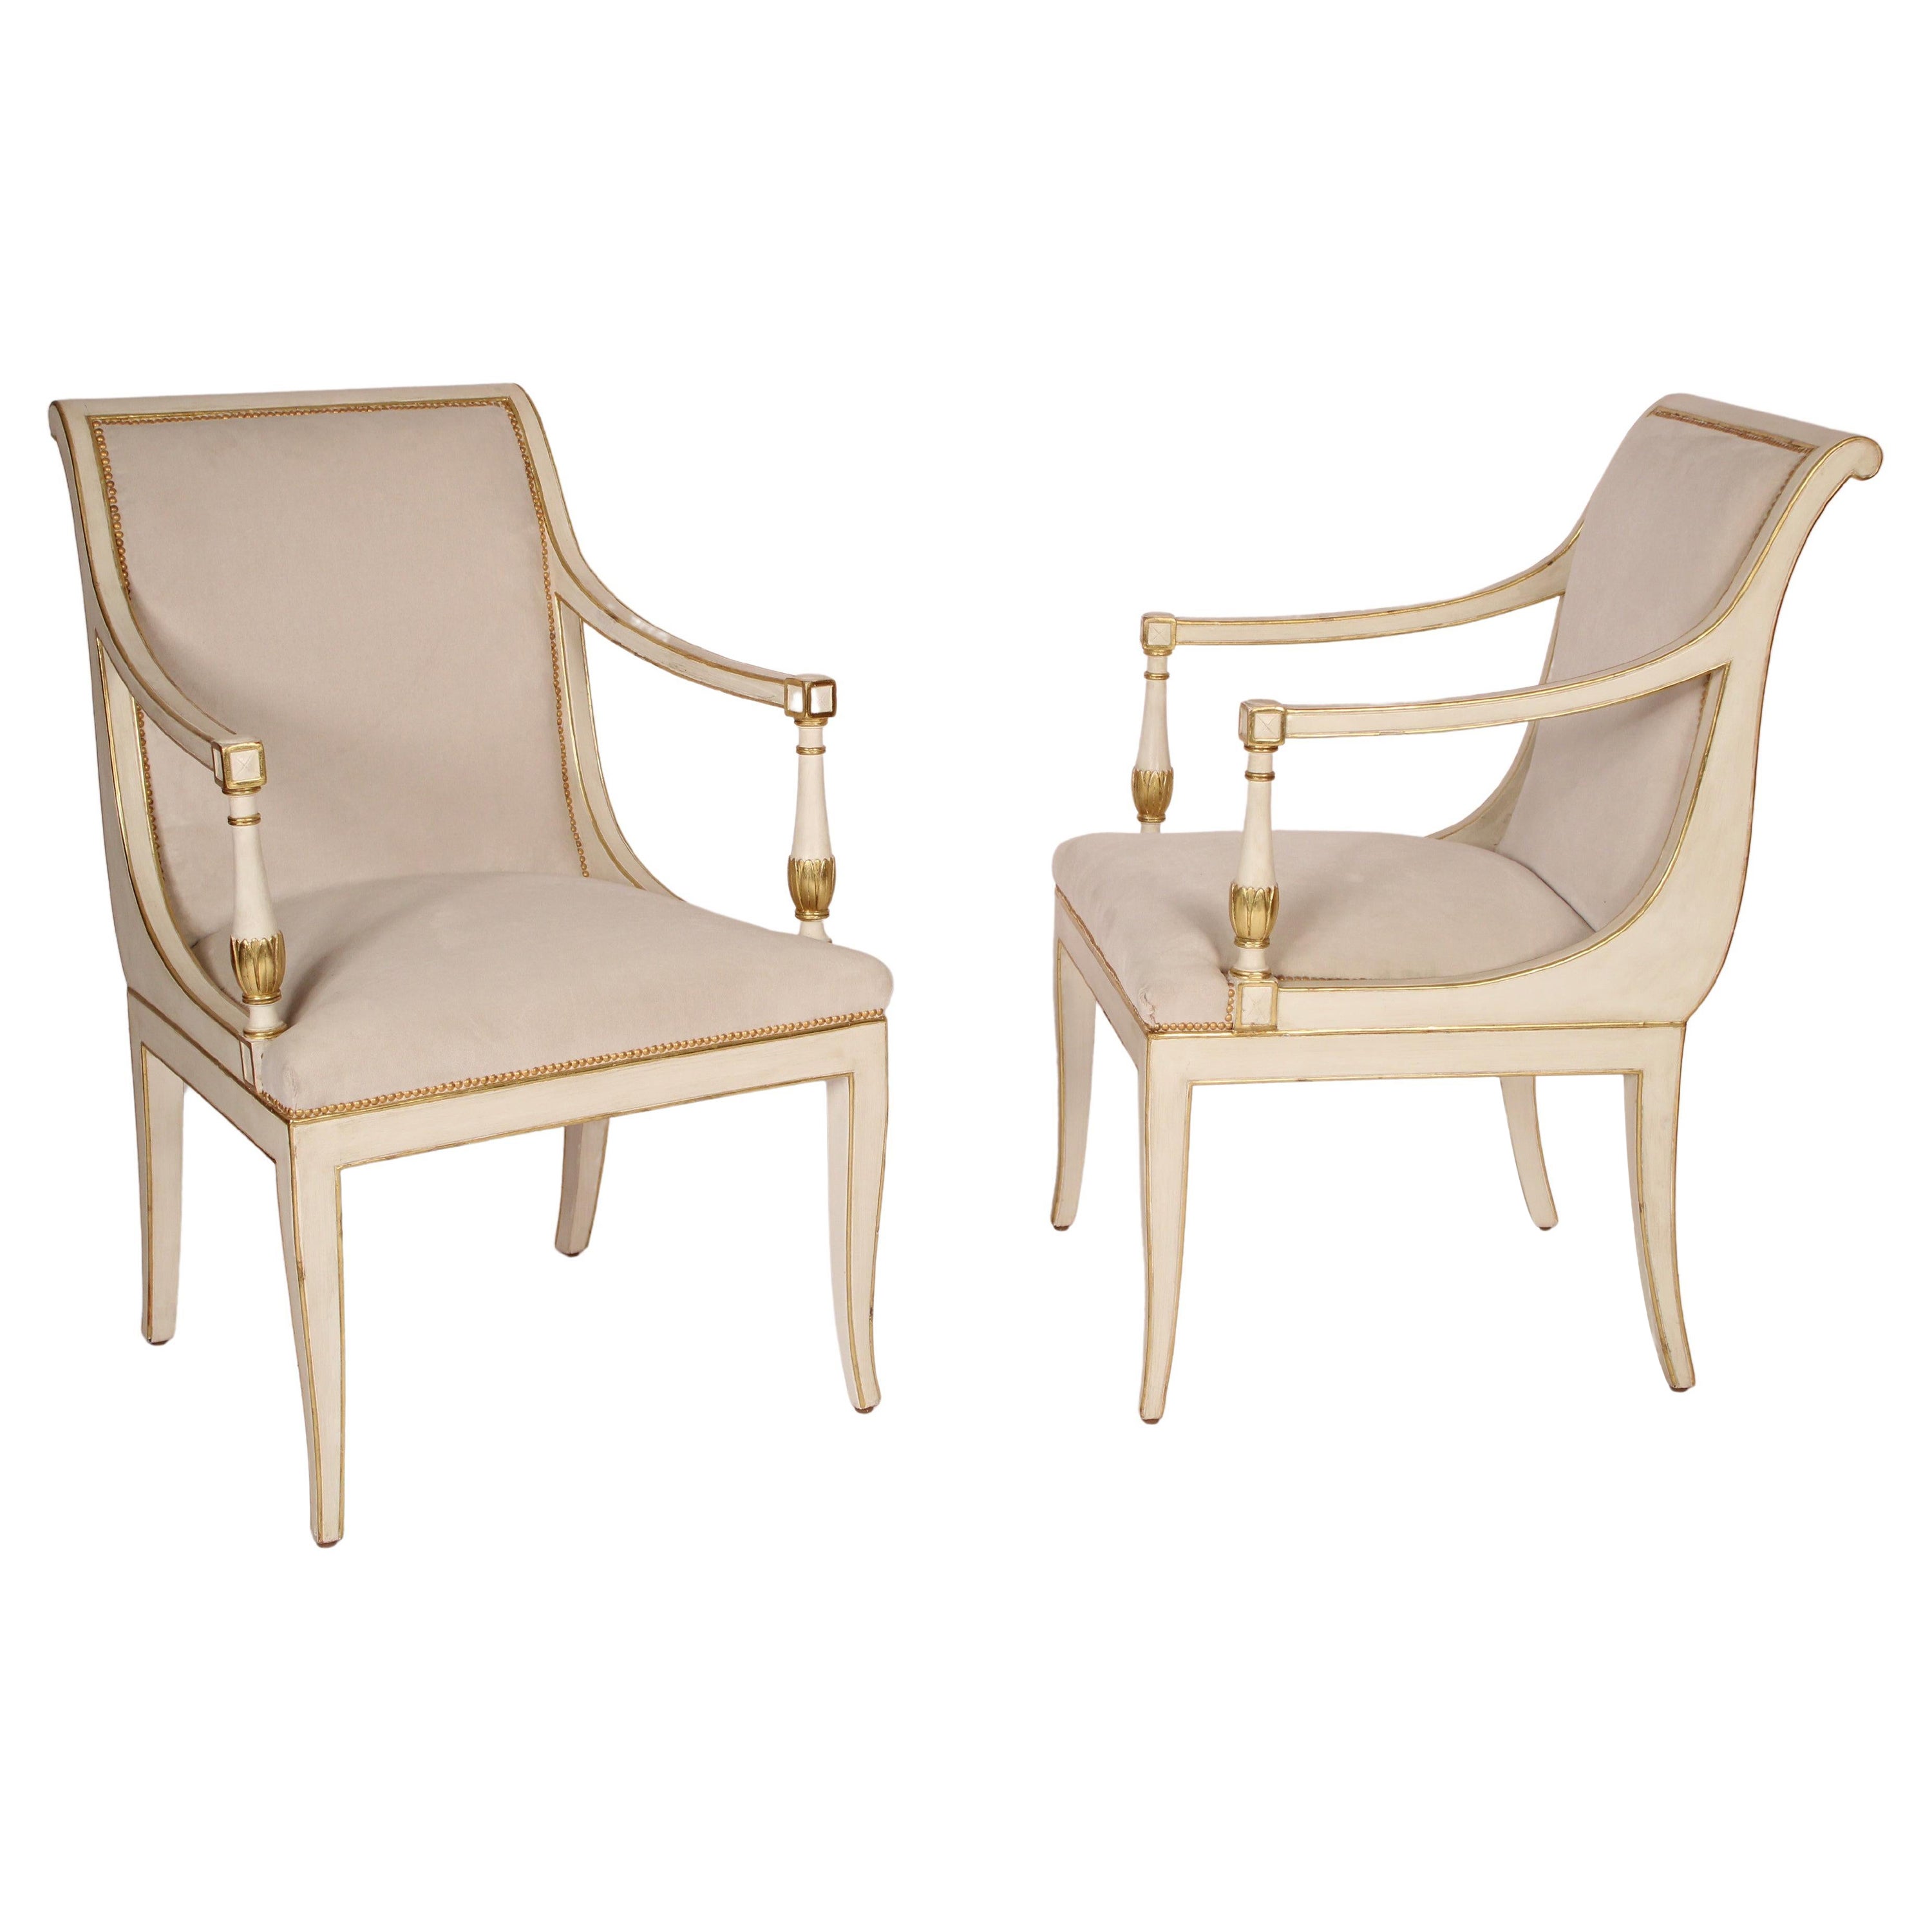 Pair of Neo Classical Style Painted and Gilt Decorated Armchairs For Sale